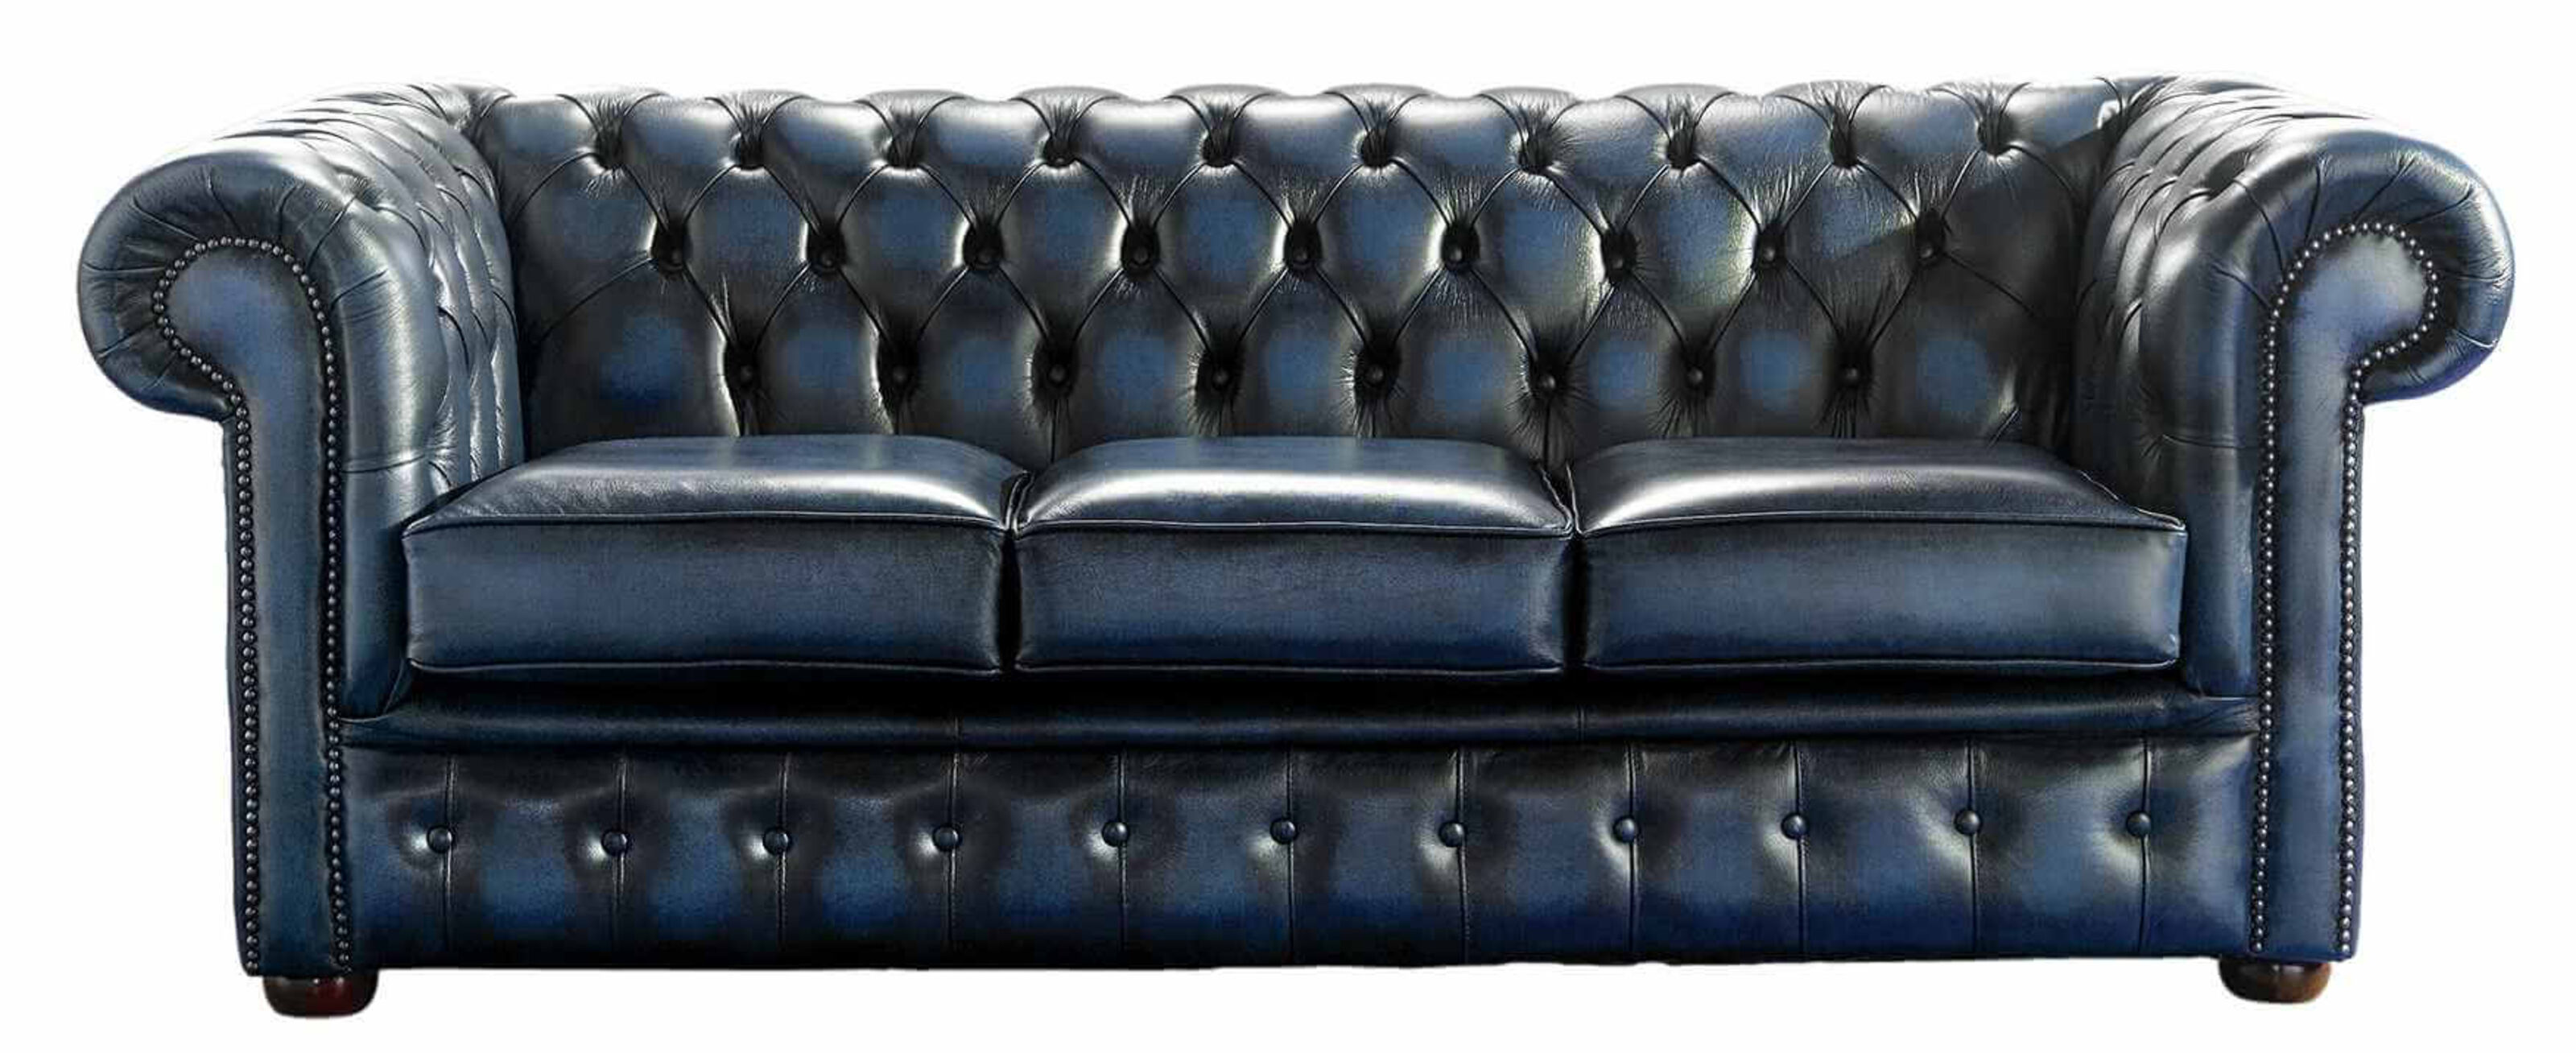 Exploring Nearby Chesterfield Sofa Showrooms Discovering Classic Comfort in Your Area  %Post Title